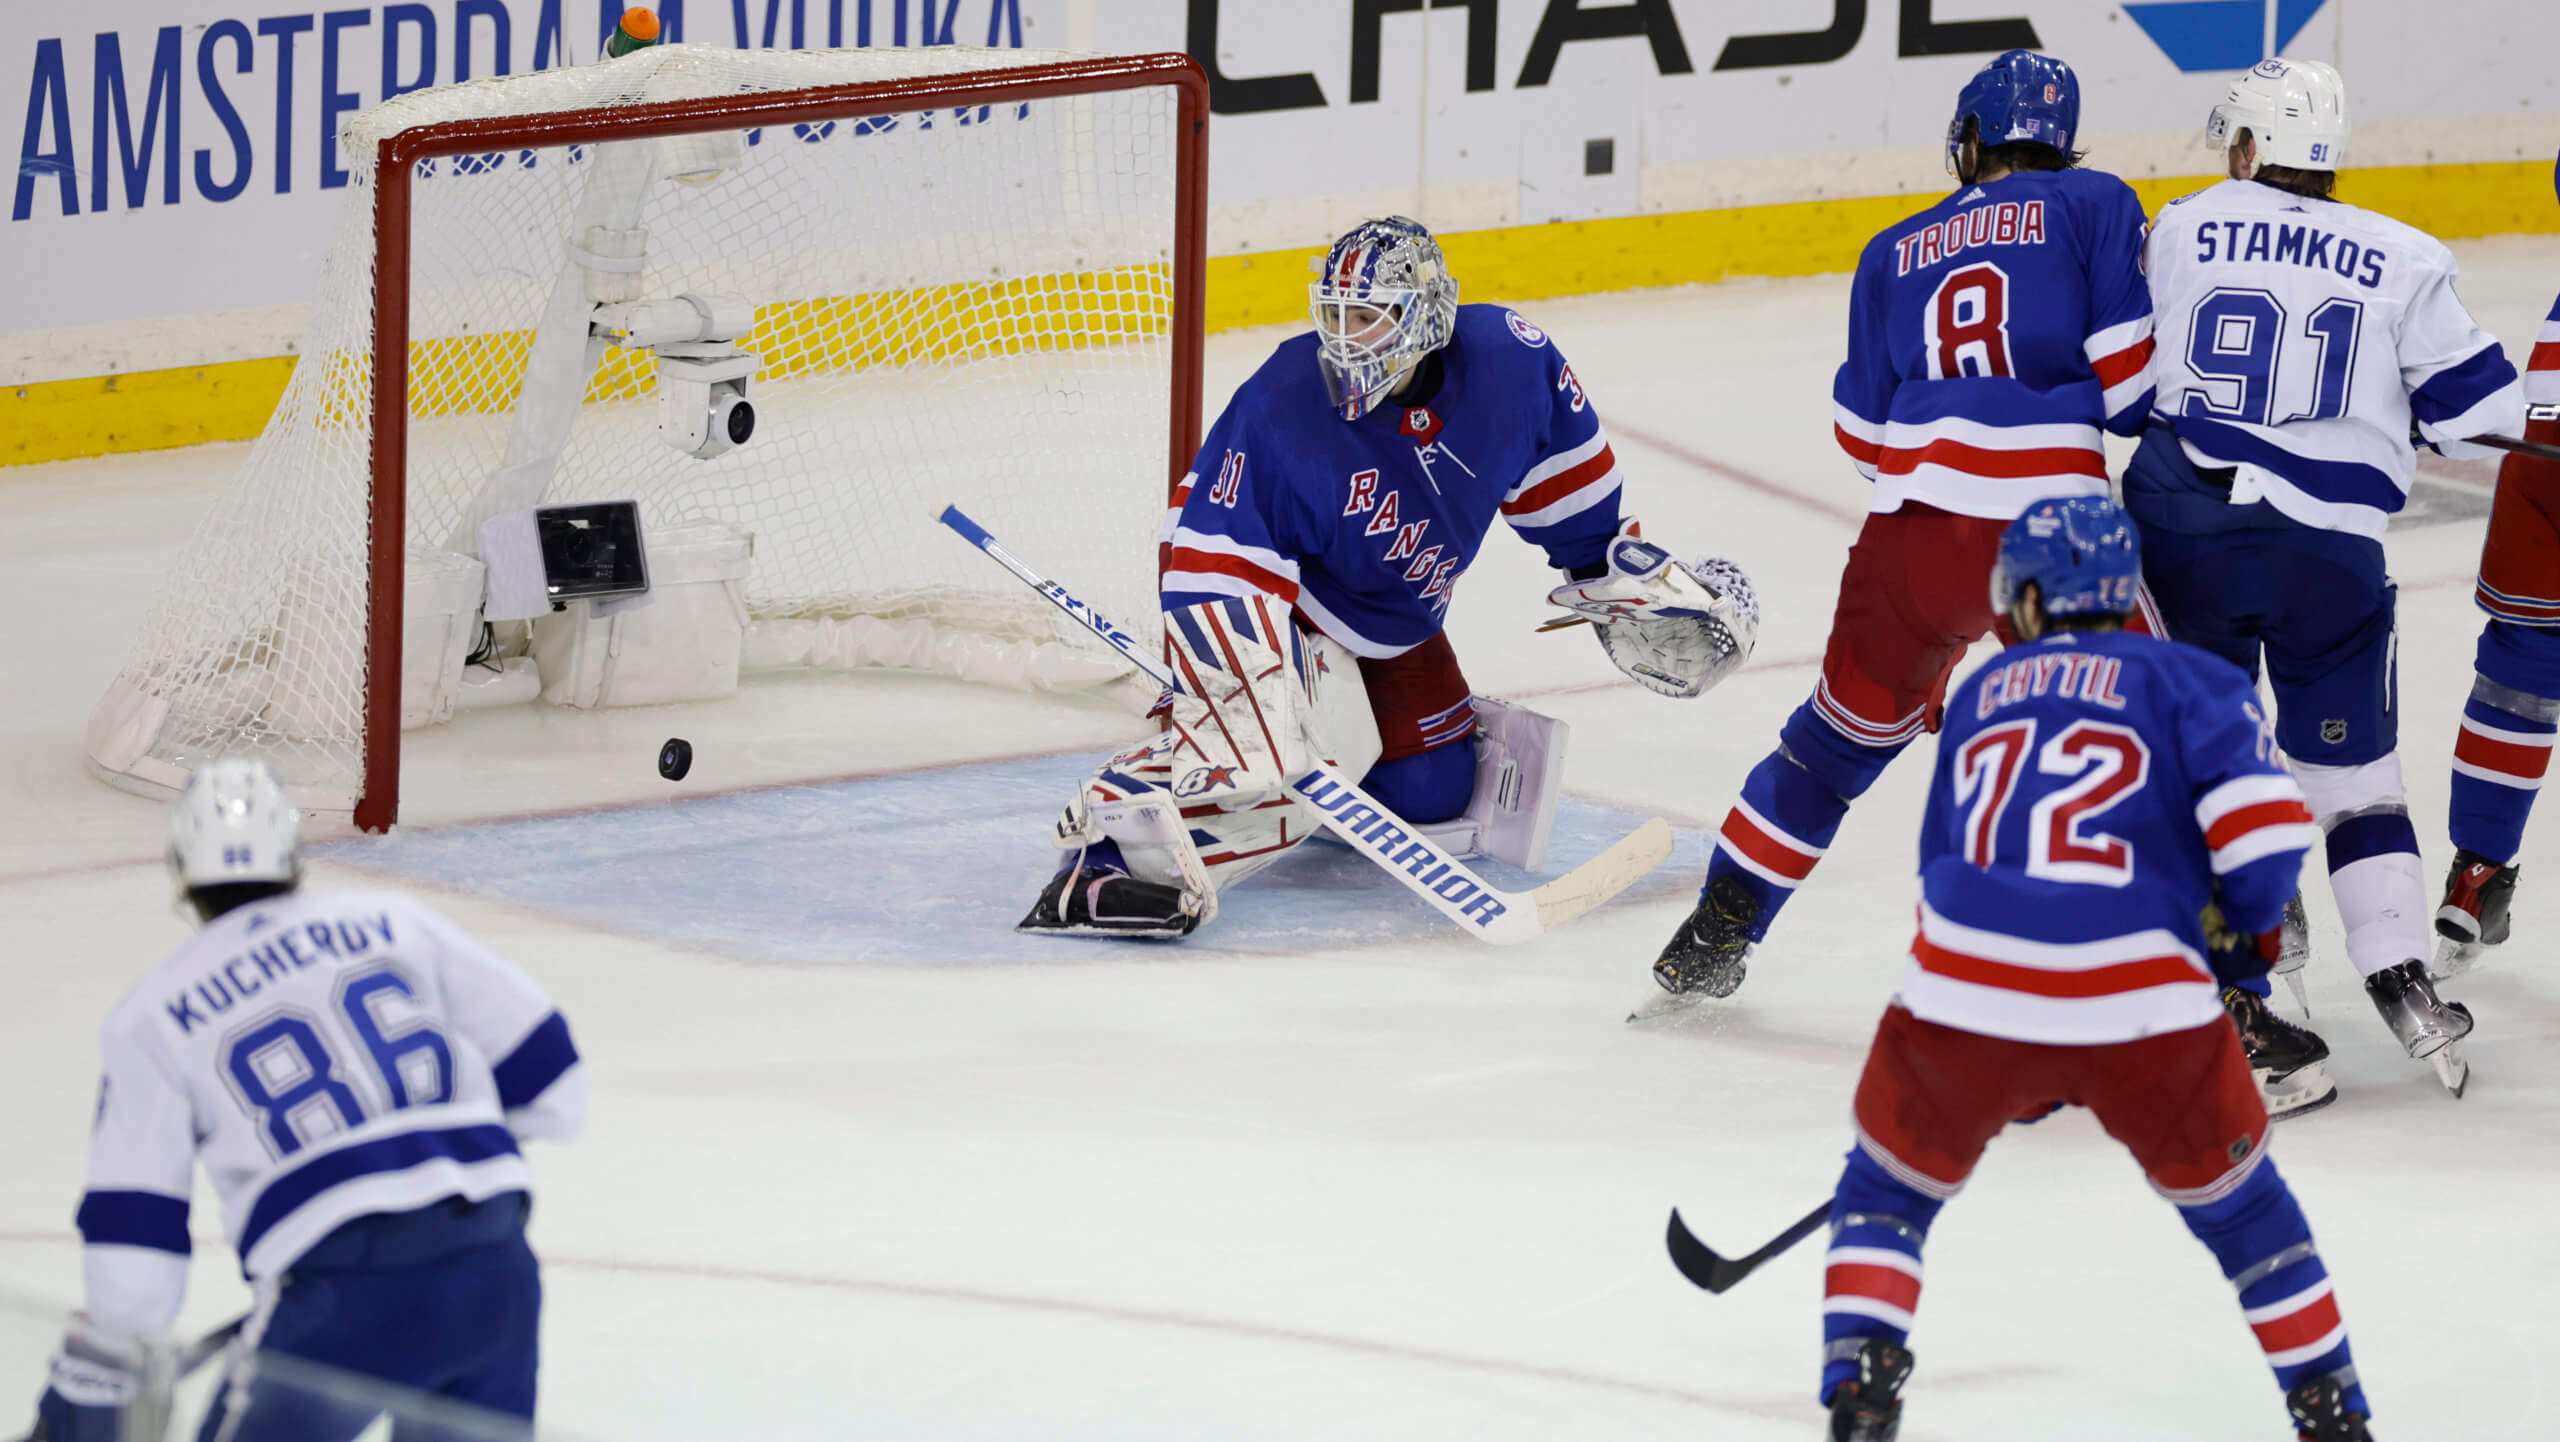 Rangers' St. Louis Decides to Play Game 5 - The New York Times